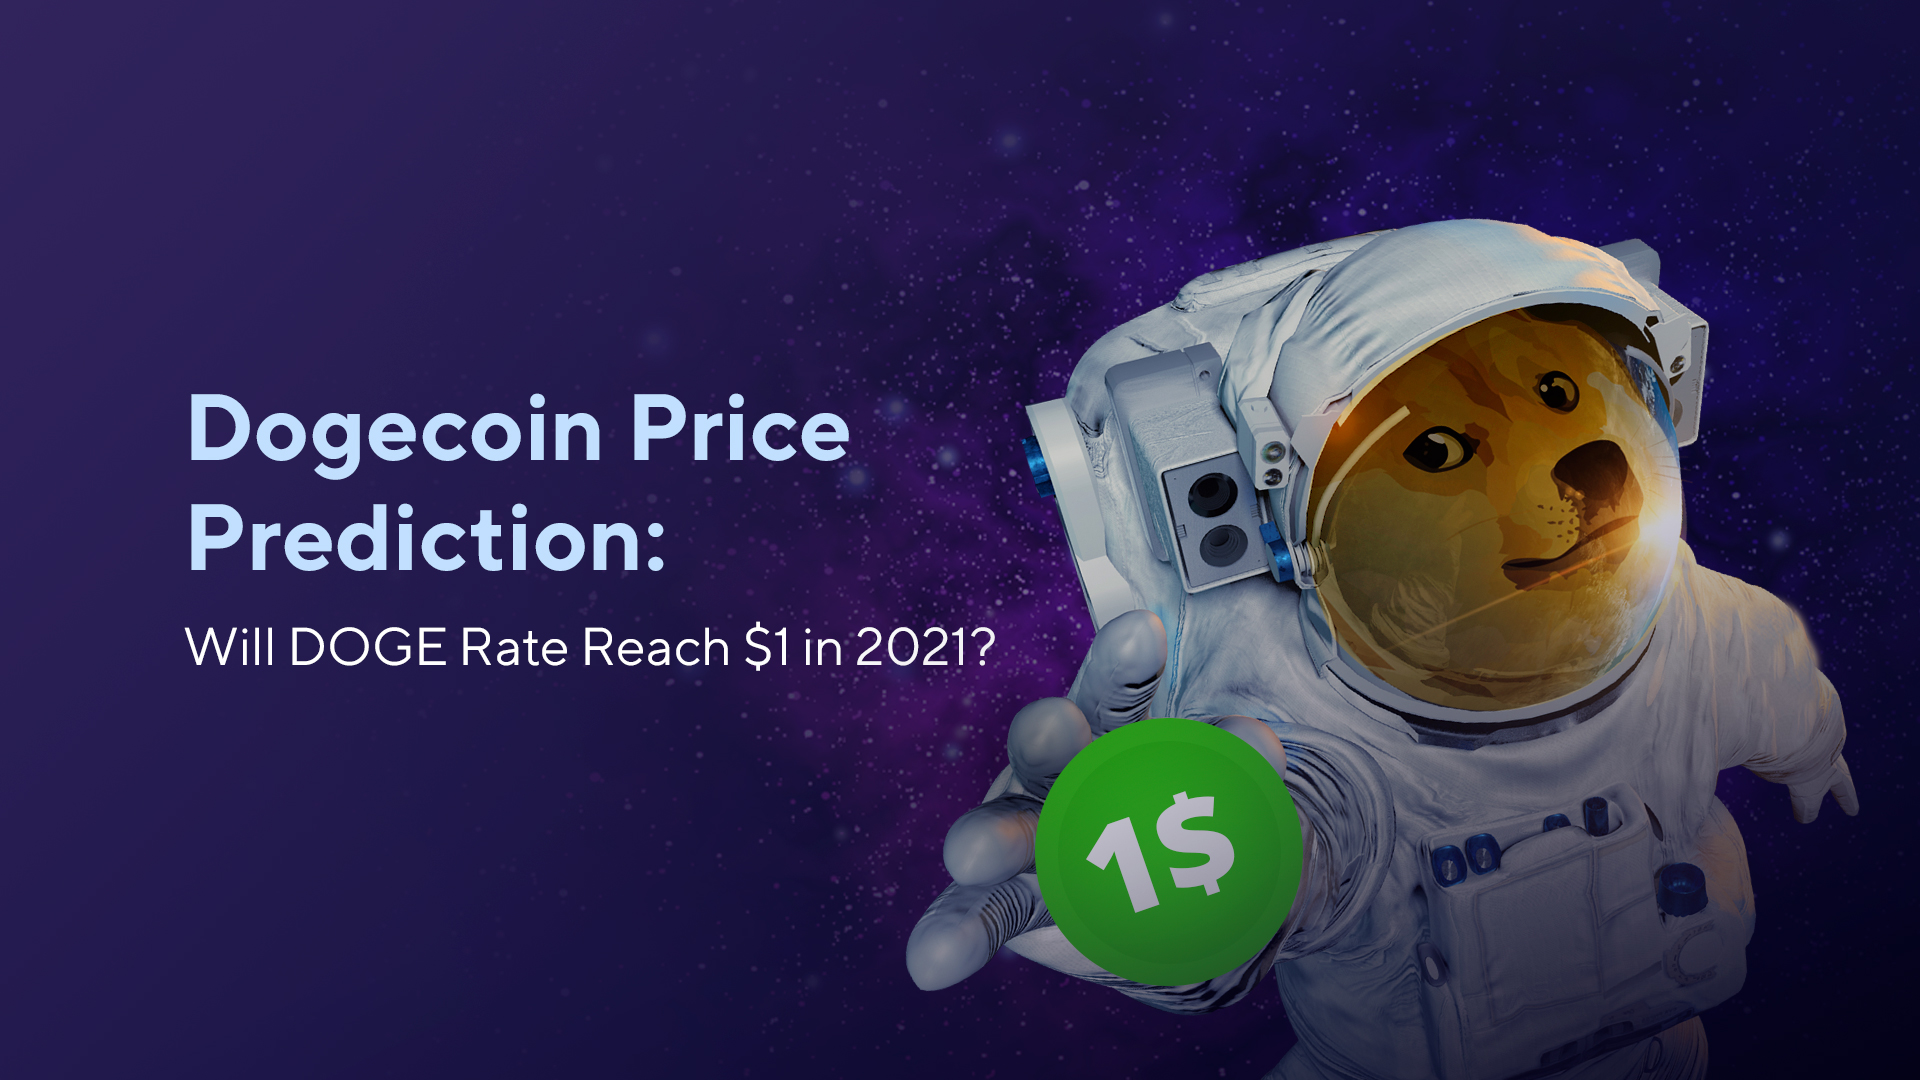 Dogecoin Price Prediction: Will DOGE Rate Reach $1 in 2021?